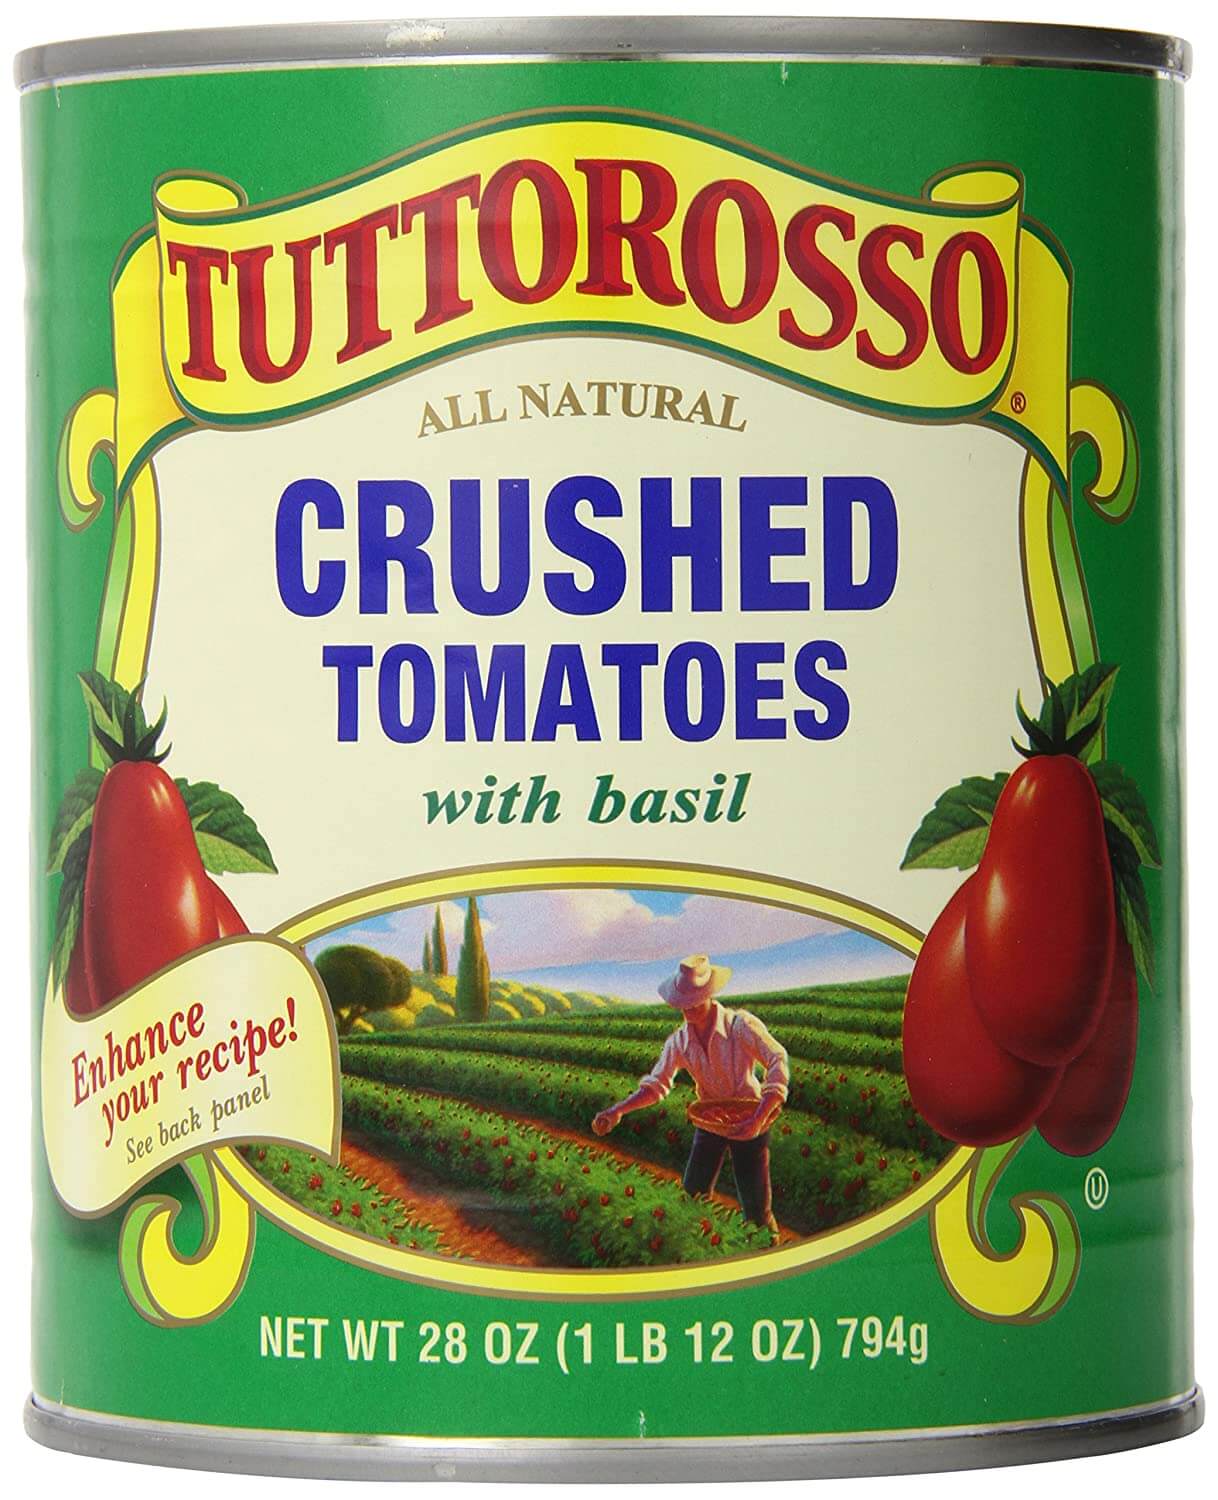 Tuttorosso Crushed Tomatoes